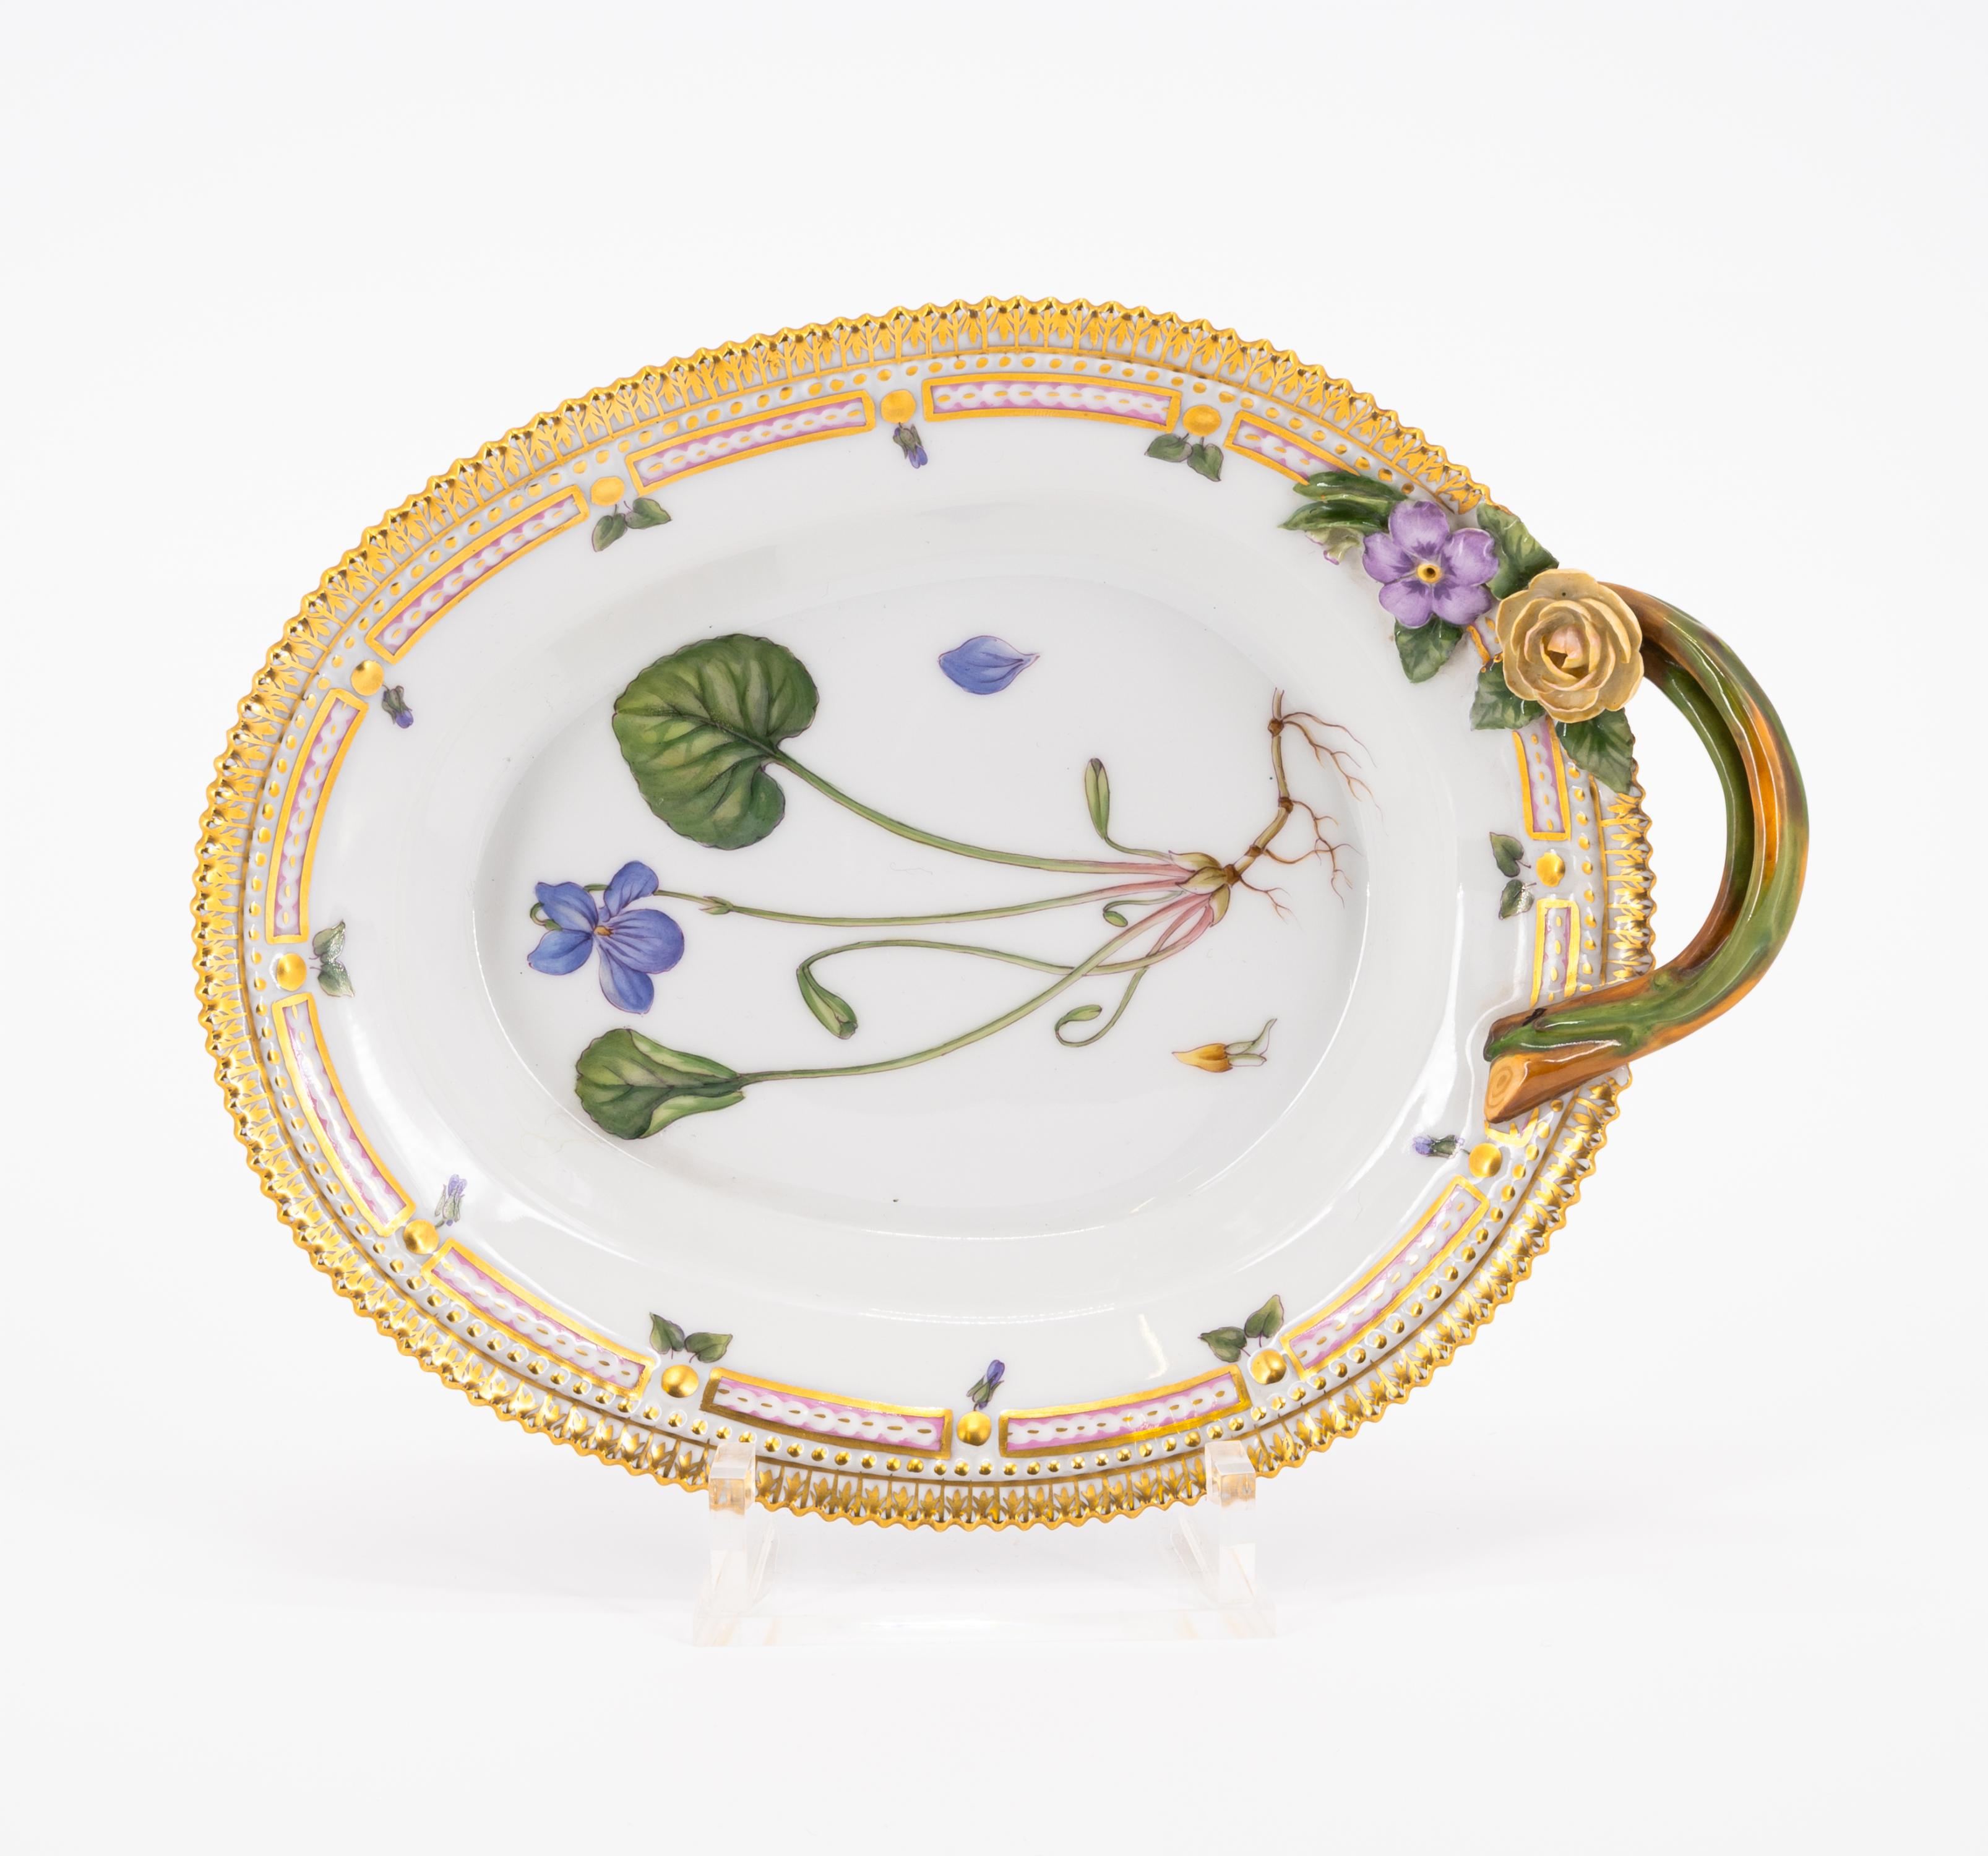 18 PIECES FROM A PORCELAIN DINNER SERVICE 'FLORA DANICA' - Image 9 of 26